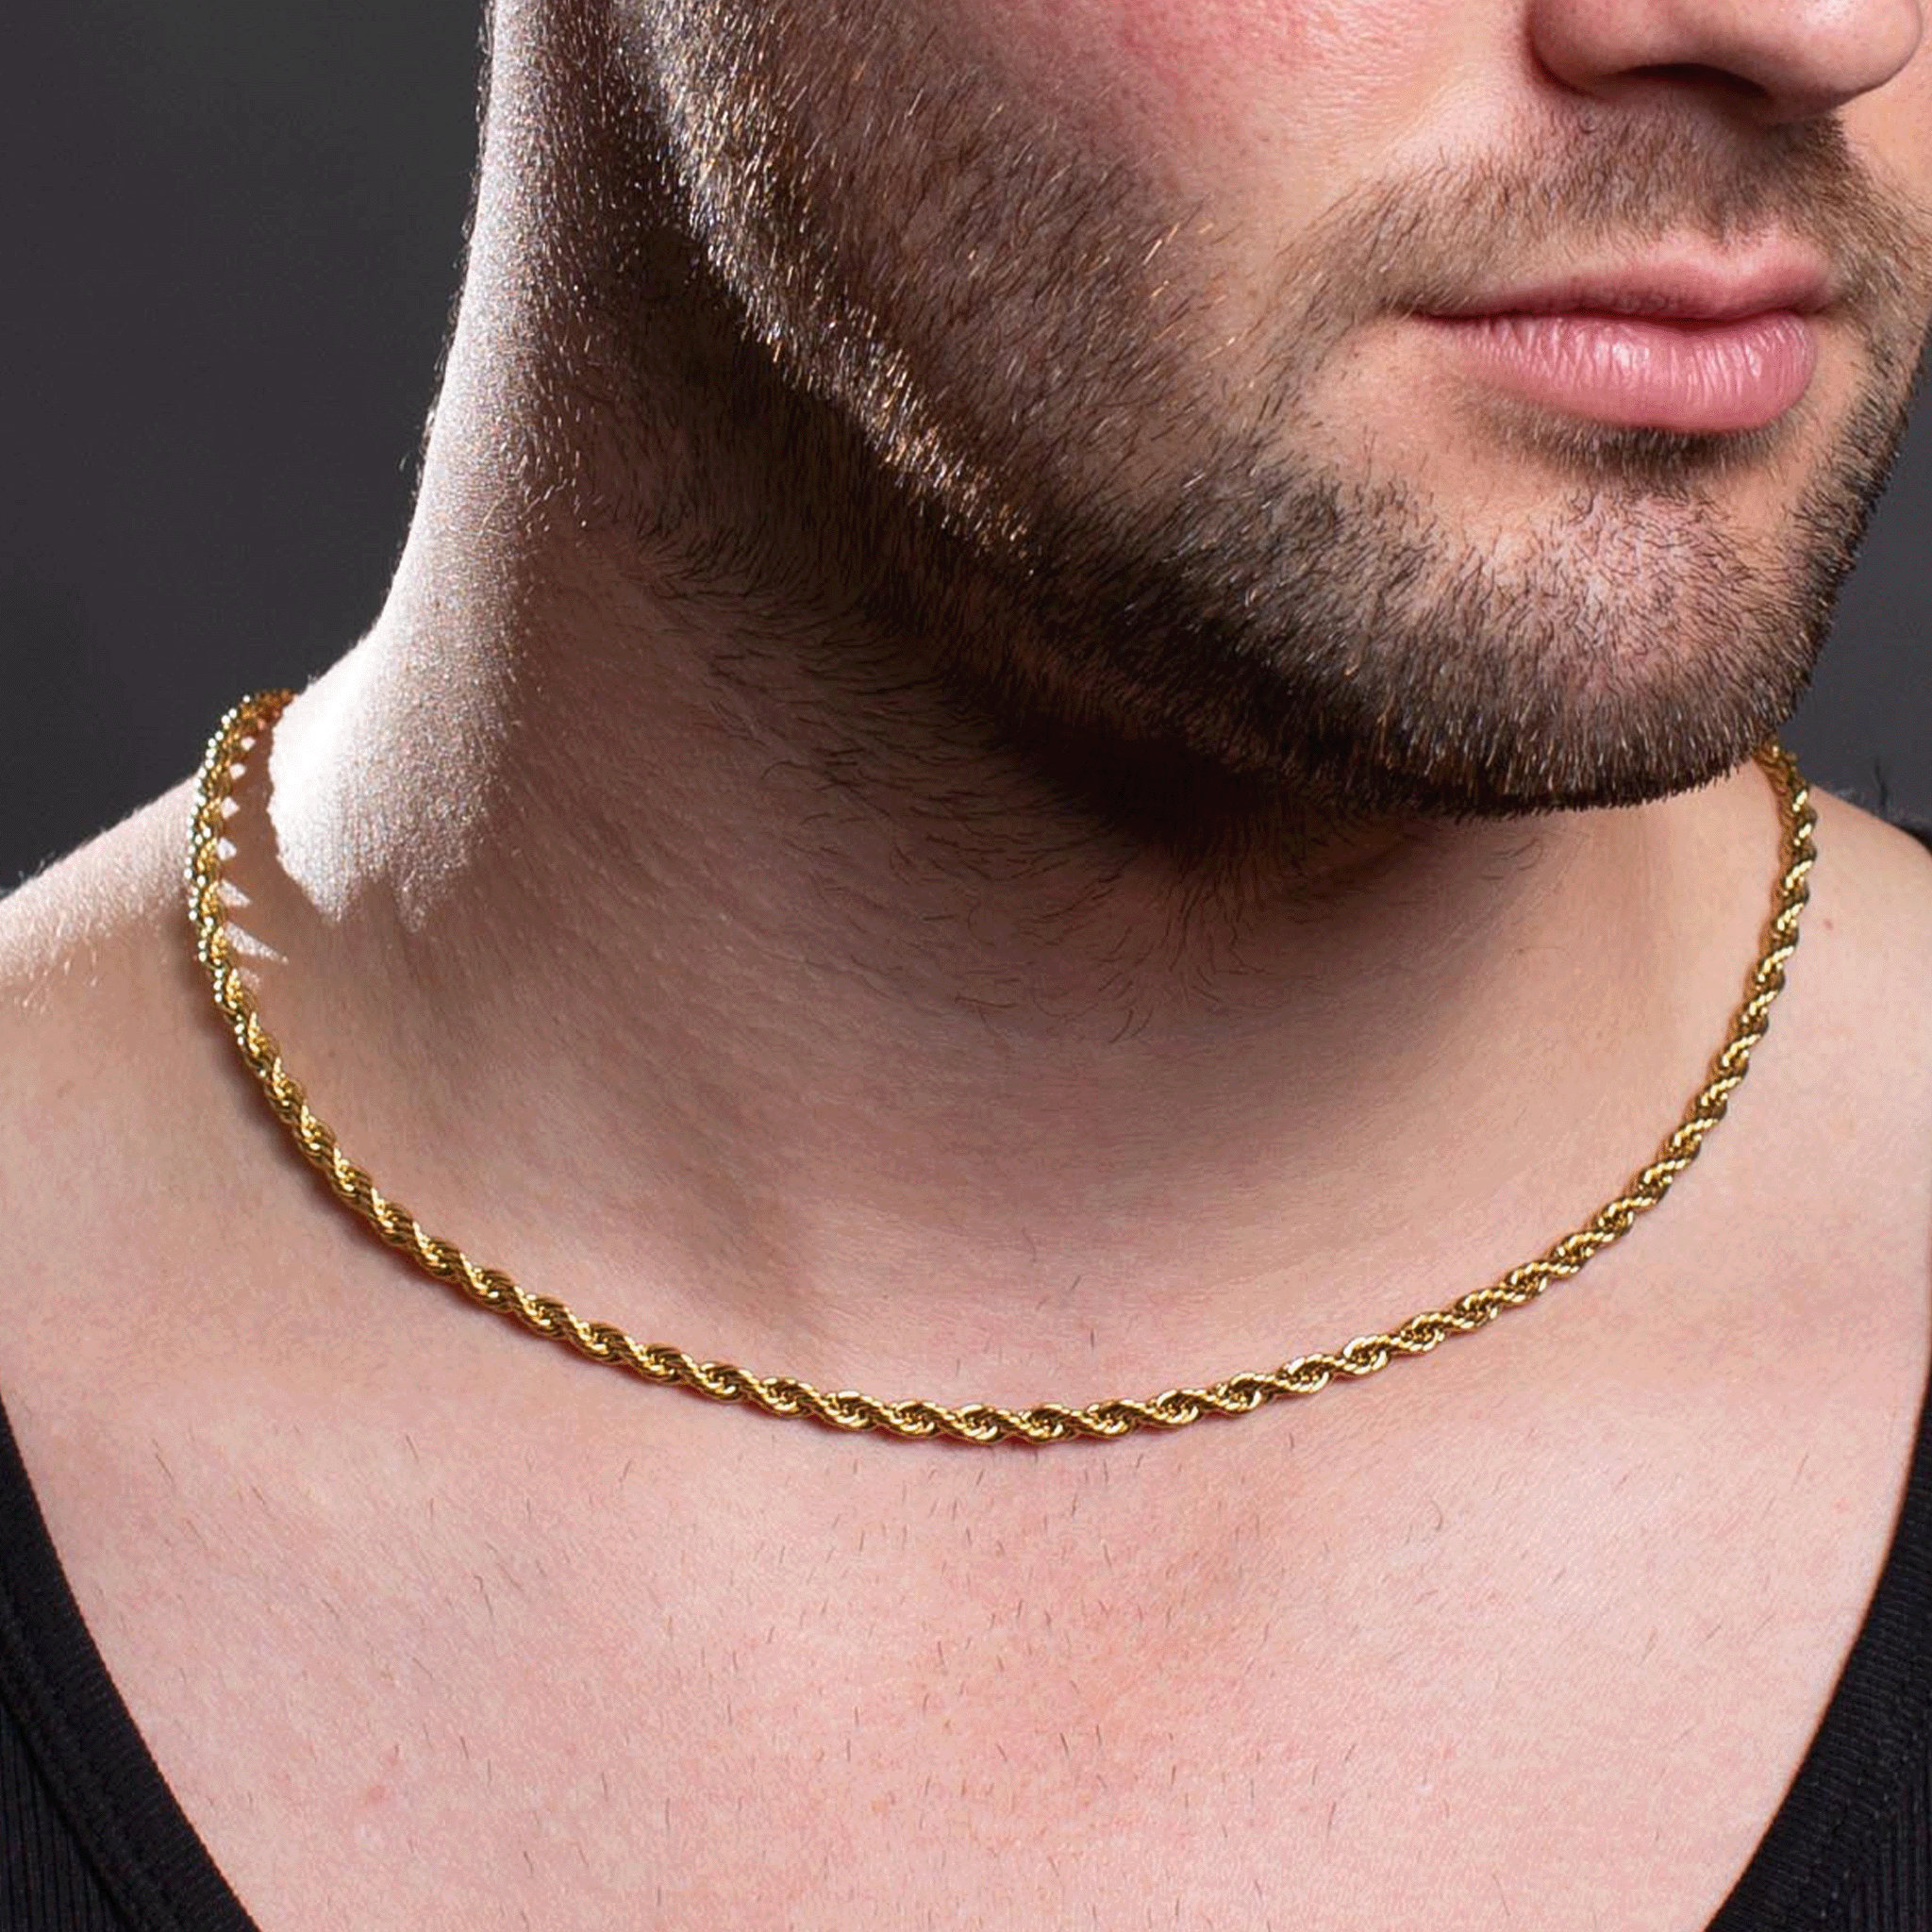 Graham Stainless Steel Rope Chain Necklace